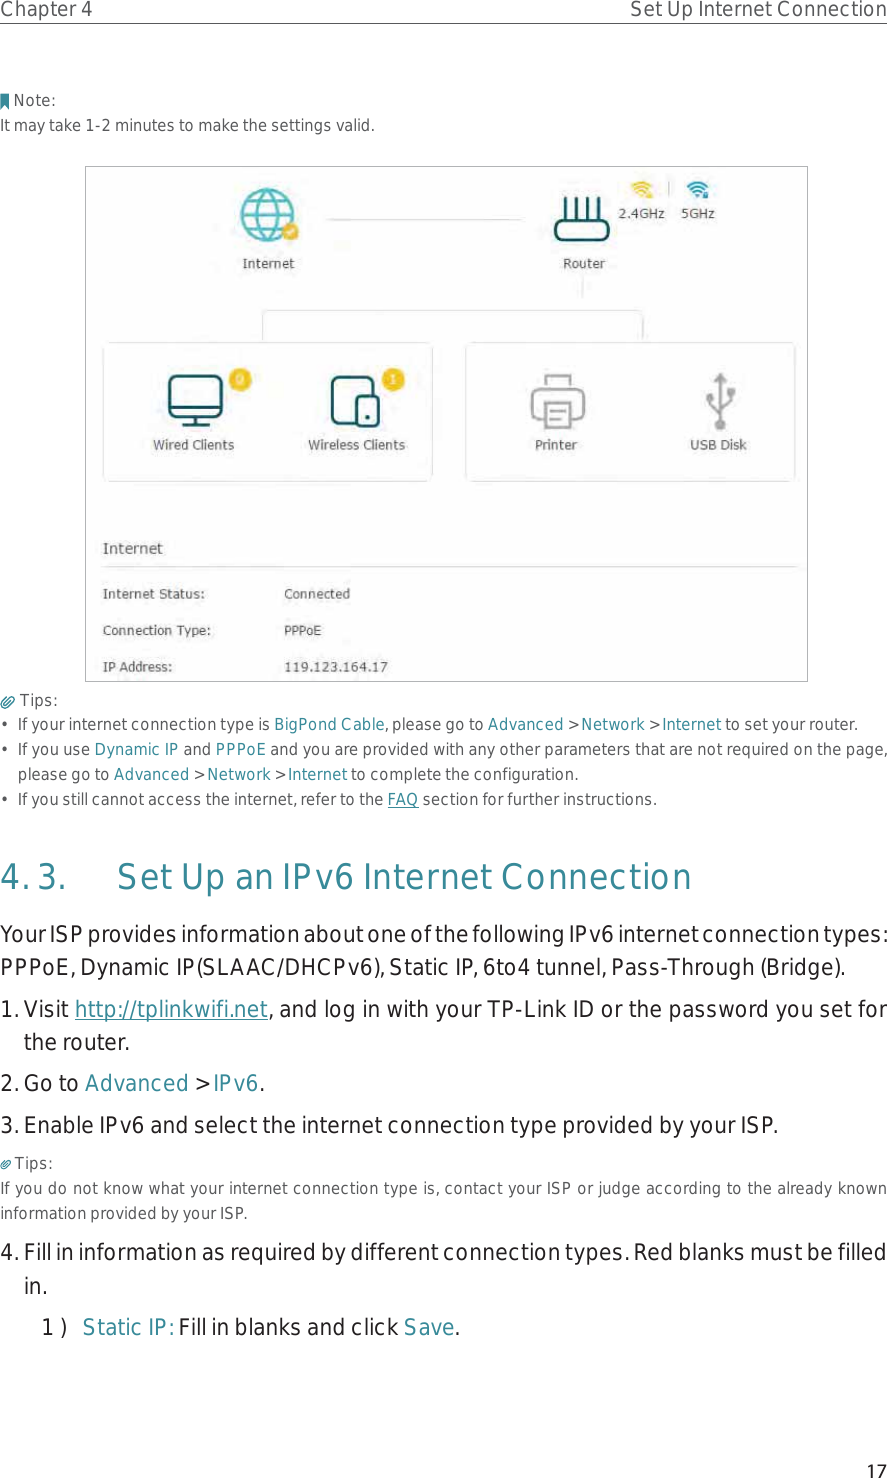 17Chapter 4 Set Up Internet ConnectionNote: It may take 1-2 minutes to make the settings valid. Tips: •  If your internet connection type is BigPond Cable, please go to Advanced &gt; Network &gt; Internet to set your router.• If you use Dynamic IP and PPPoE and you are provided with any other parameters that are not required on the page, please go to Advanced &gt; Network &gt; Internet to complete the configuration.•  If you still cannot access the internet, refer to the FAQ section for further instructions.4. 3.  Set Up an IPv6 Internet ConnectionYour ISP provides information about one of the following IPv6 internet connection types: PPPoE, Dynamic IP(SLAAC/DHCPv6), Static IP, 6to4 tunnel, Pass-Through (Bridge).1. Visit http://tplinkwifi.net, and log in with your TP-Link ID or the password you set for the router.2. Go to Advanced &gt; IPv6. 3. Enable IPv6 and select the internet connection type provided by your ISP.Tips:If you do not know what your internet connection type is, contact your ISP or judge according to the already known information provided by your ISP.4. Fill in information as required by different connection types. Red blanks must be filled in.1 )  Static IP: Fill in blanks and click Save.